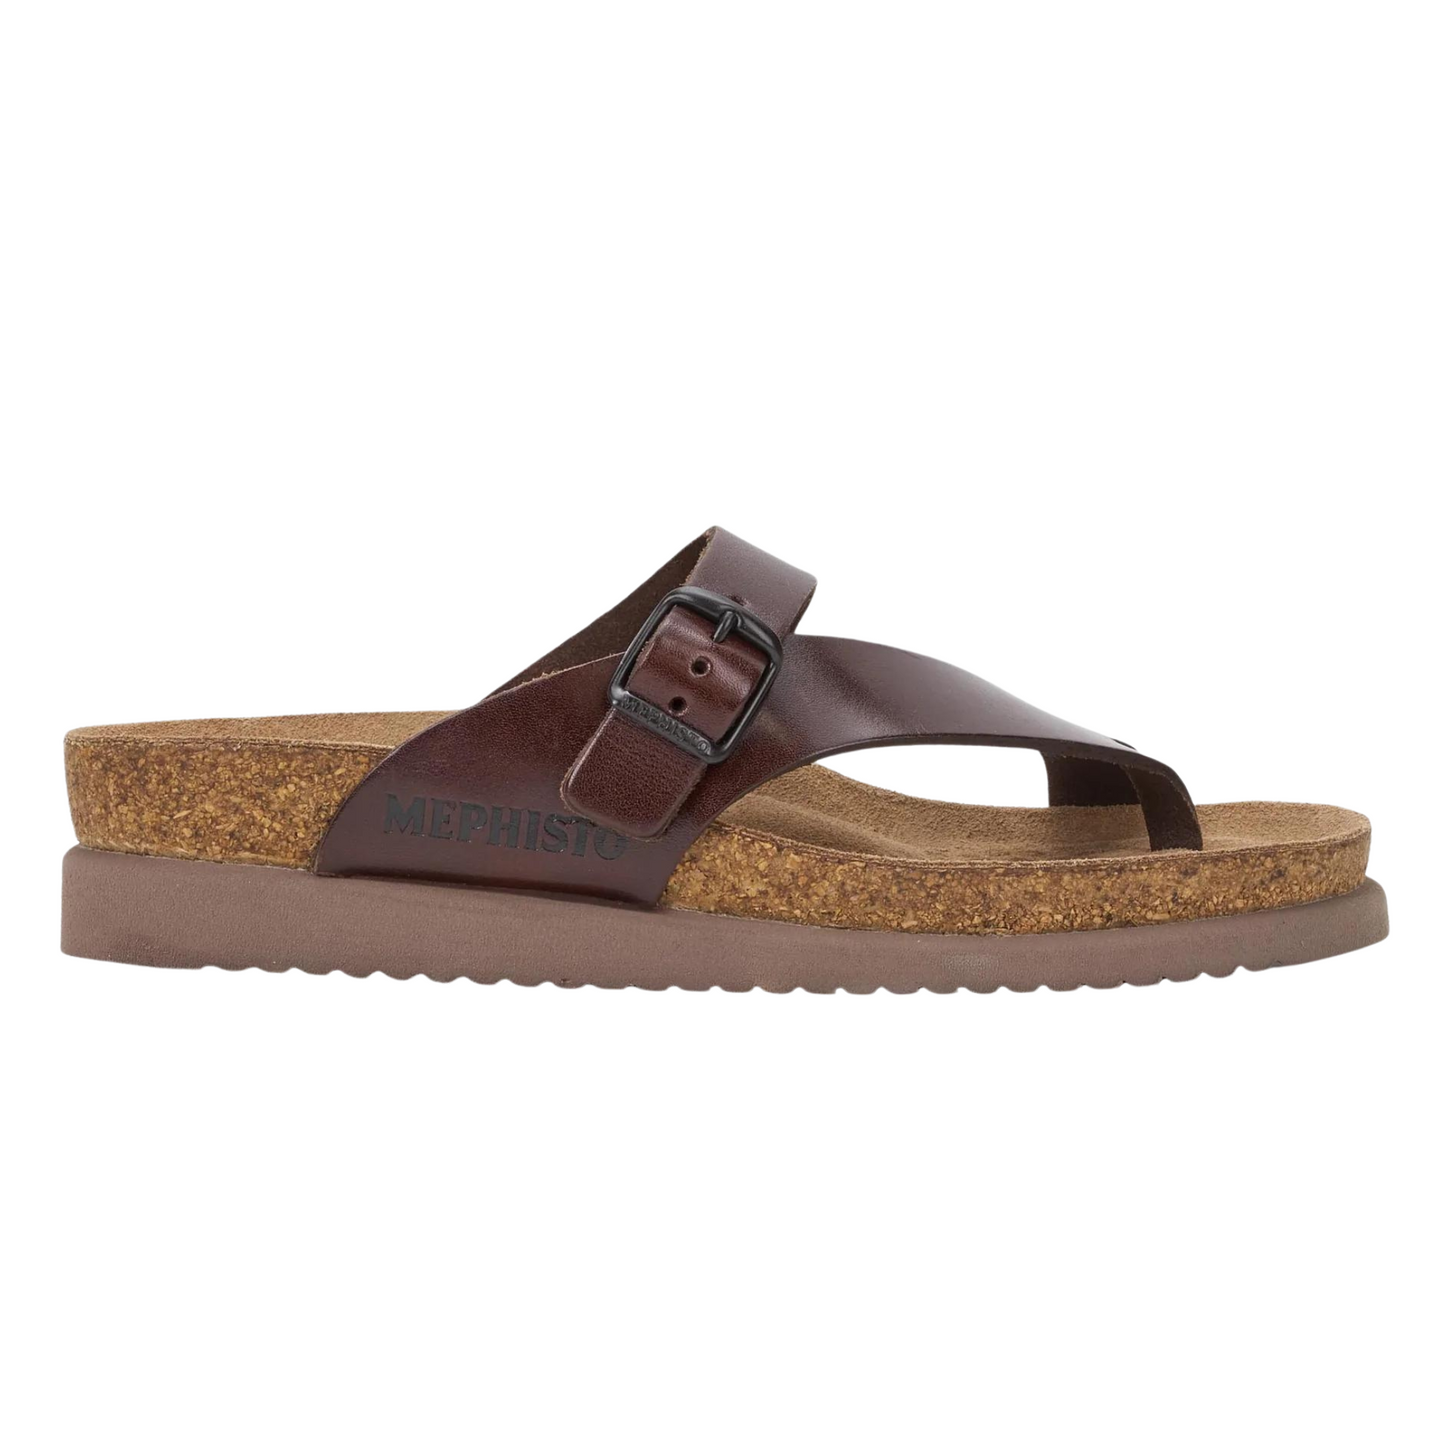 A right angle view of a cork sandal with a light brown outsole, dark brown leather straps and toe loop, and a dark metal buckle.